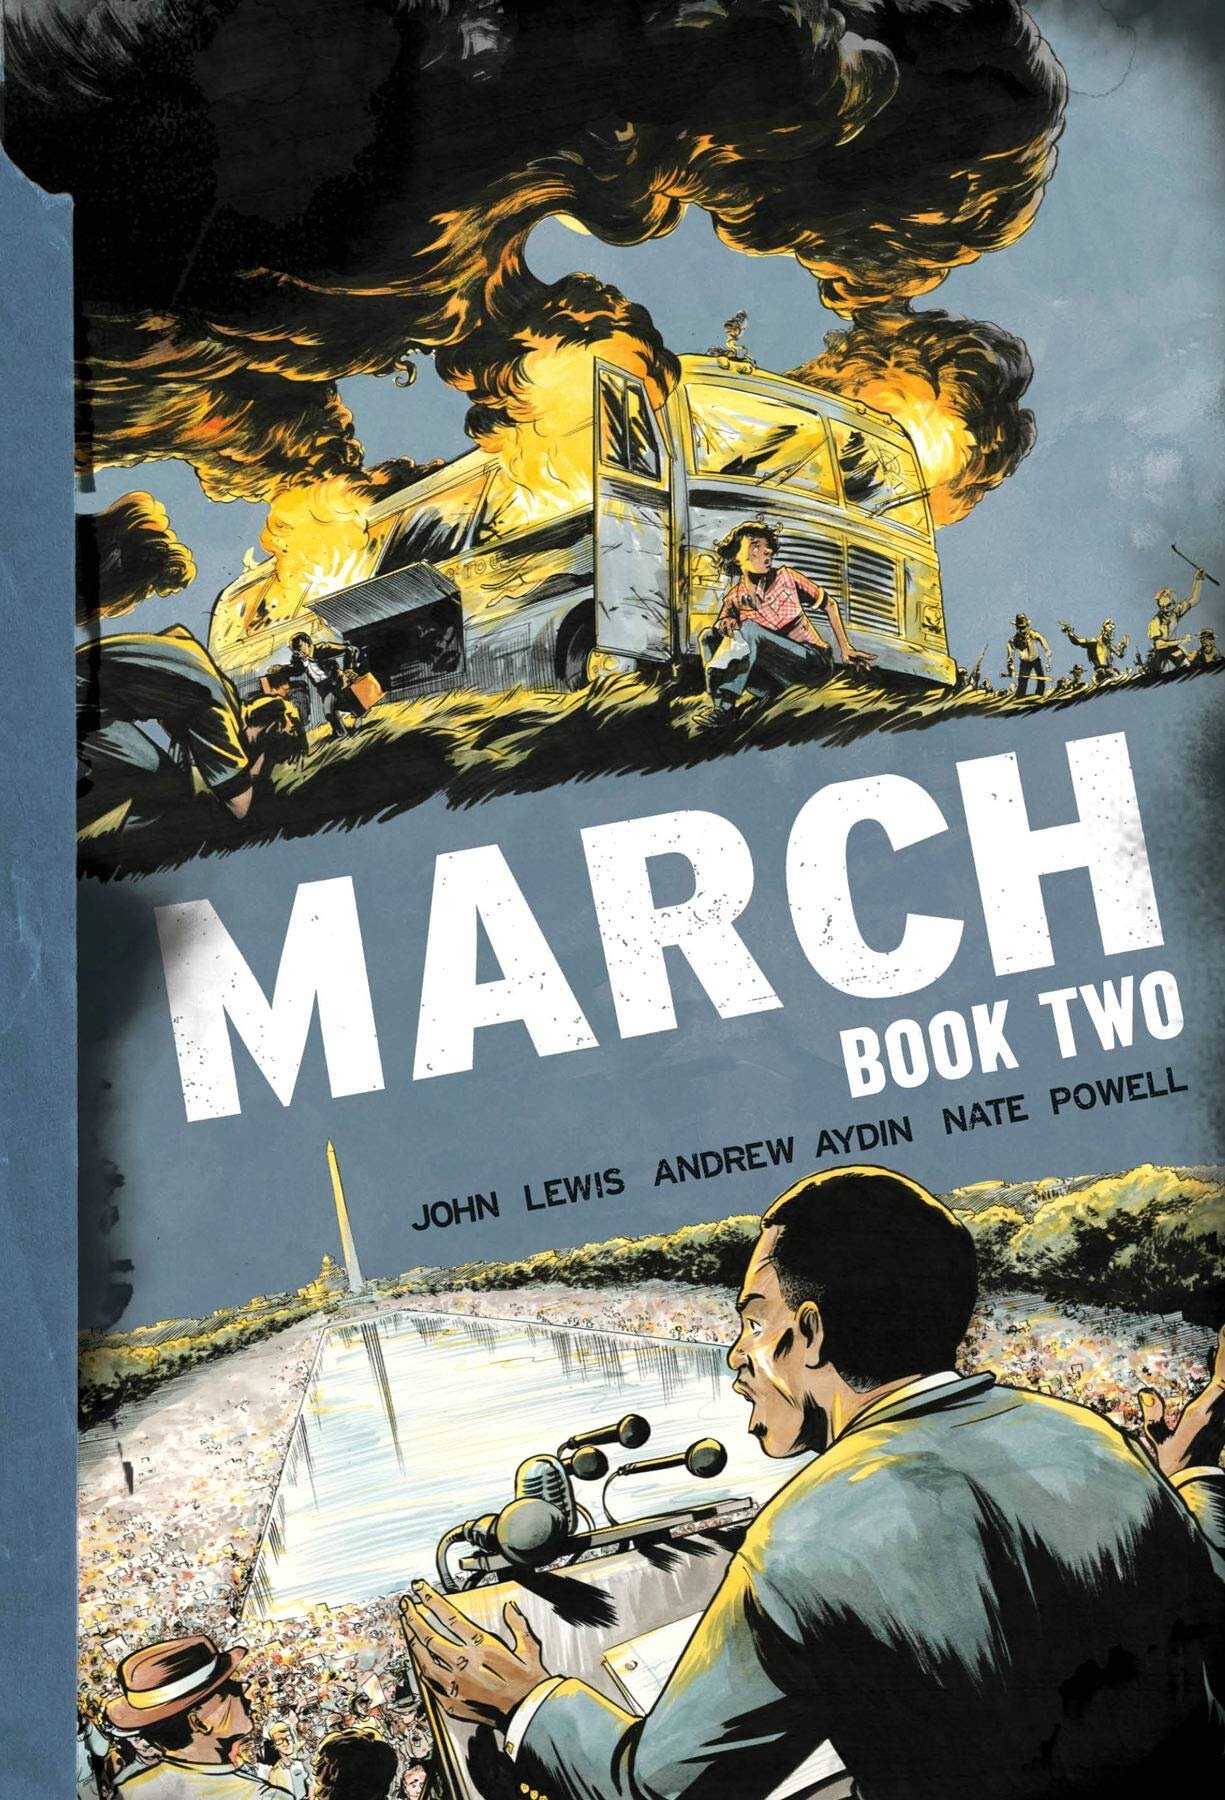 March: Book Two by John Lewis, Andrew Aydin, Nate Powell